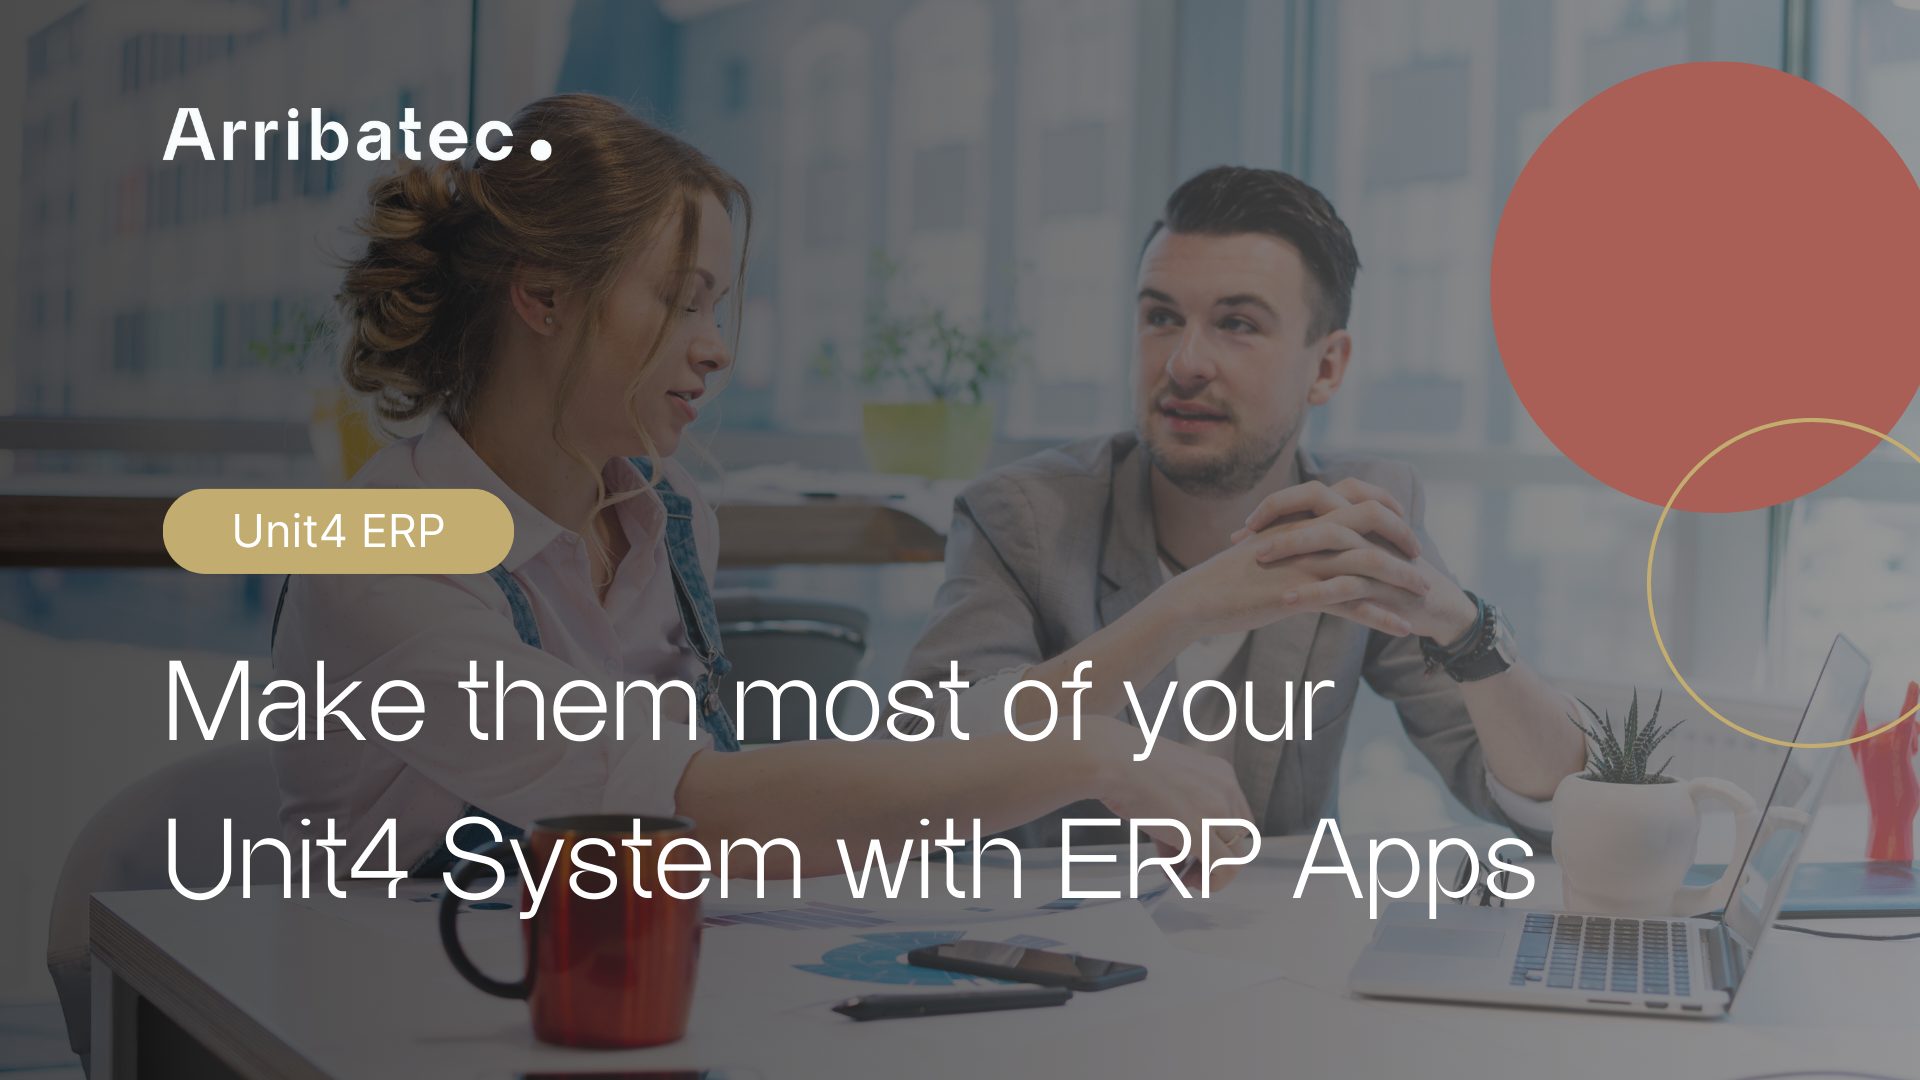 Automated invoice processing software that fully integrates with Unit4 ERP (Agresso) to help eliminate manual work and errors from your accounts payable process